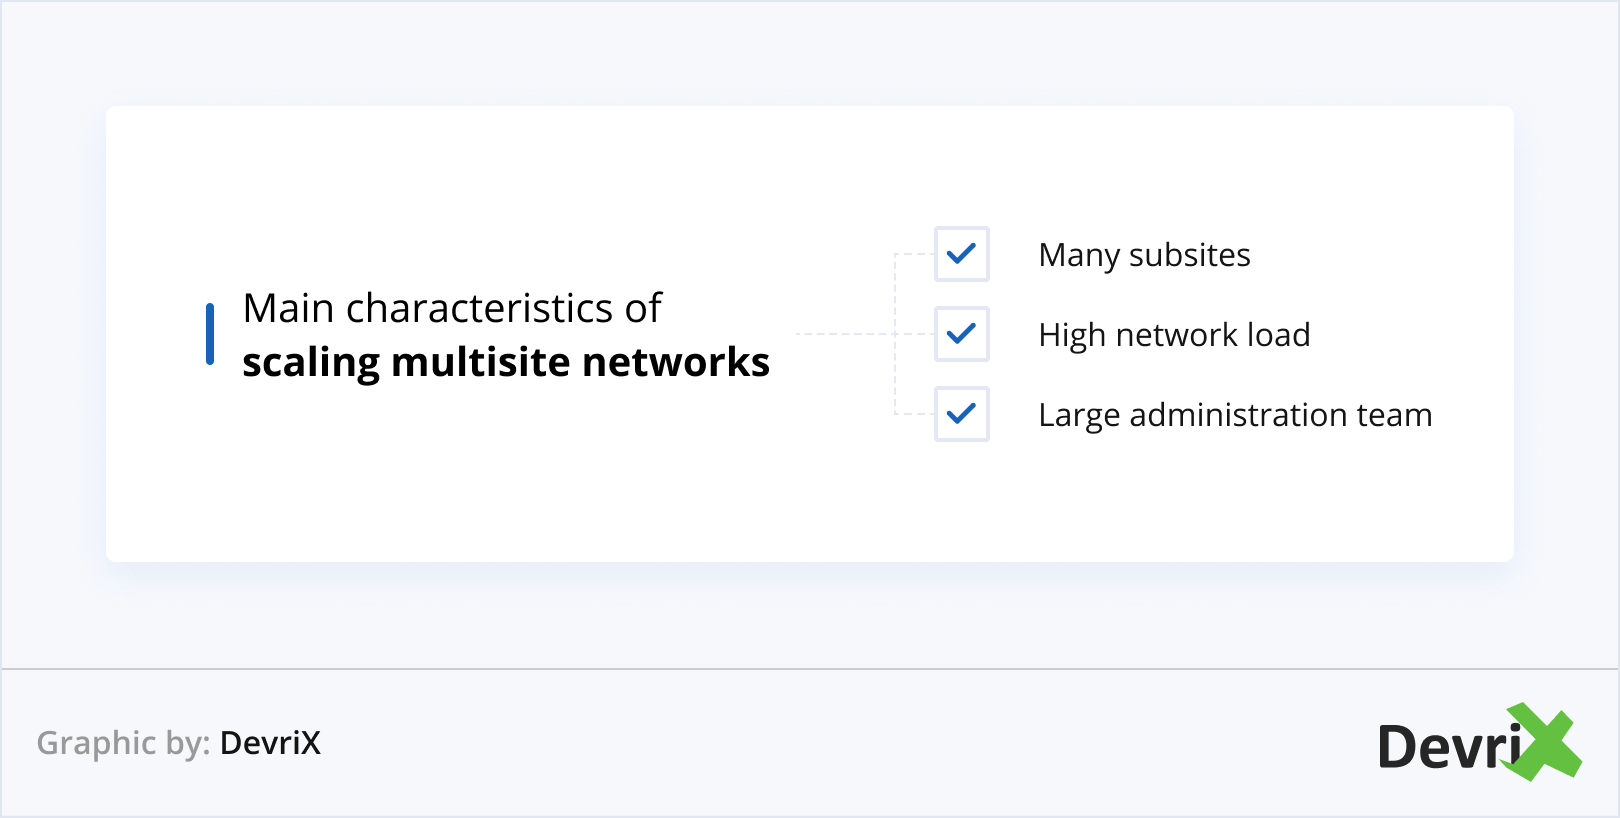 Main characteristics of scaling multisite networks